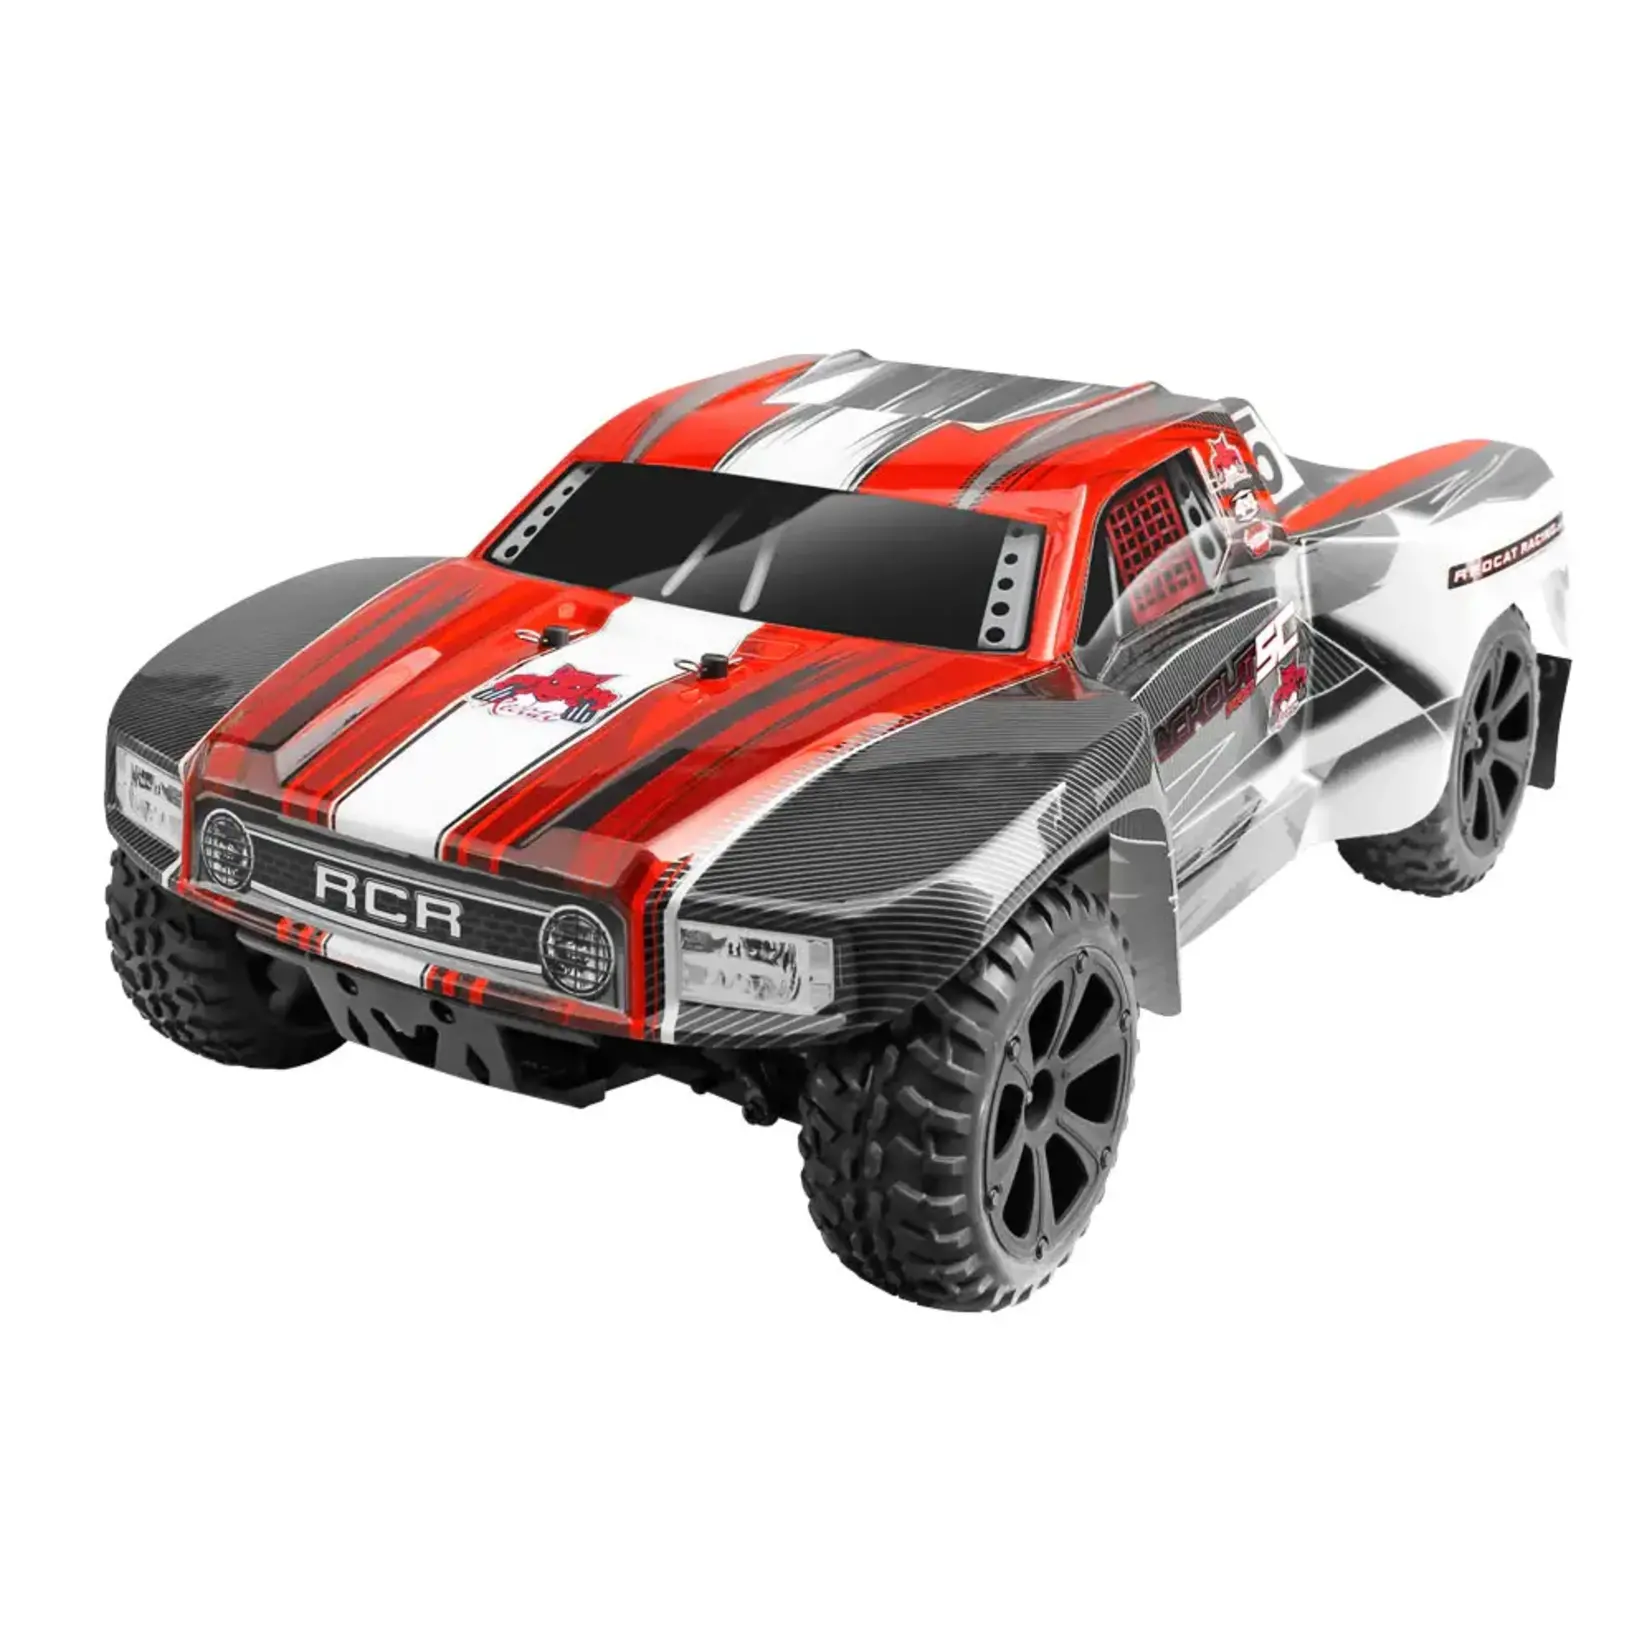 Redcat Racing Blackout™ SC PRO Short Course Truck 1/10 - Red